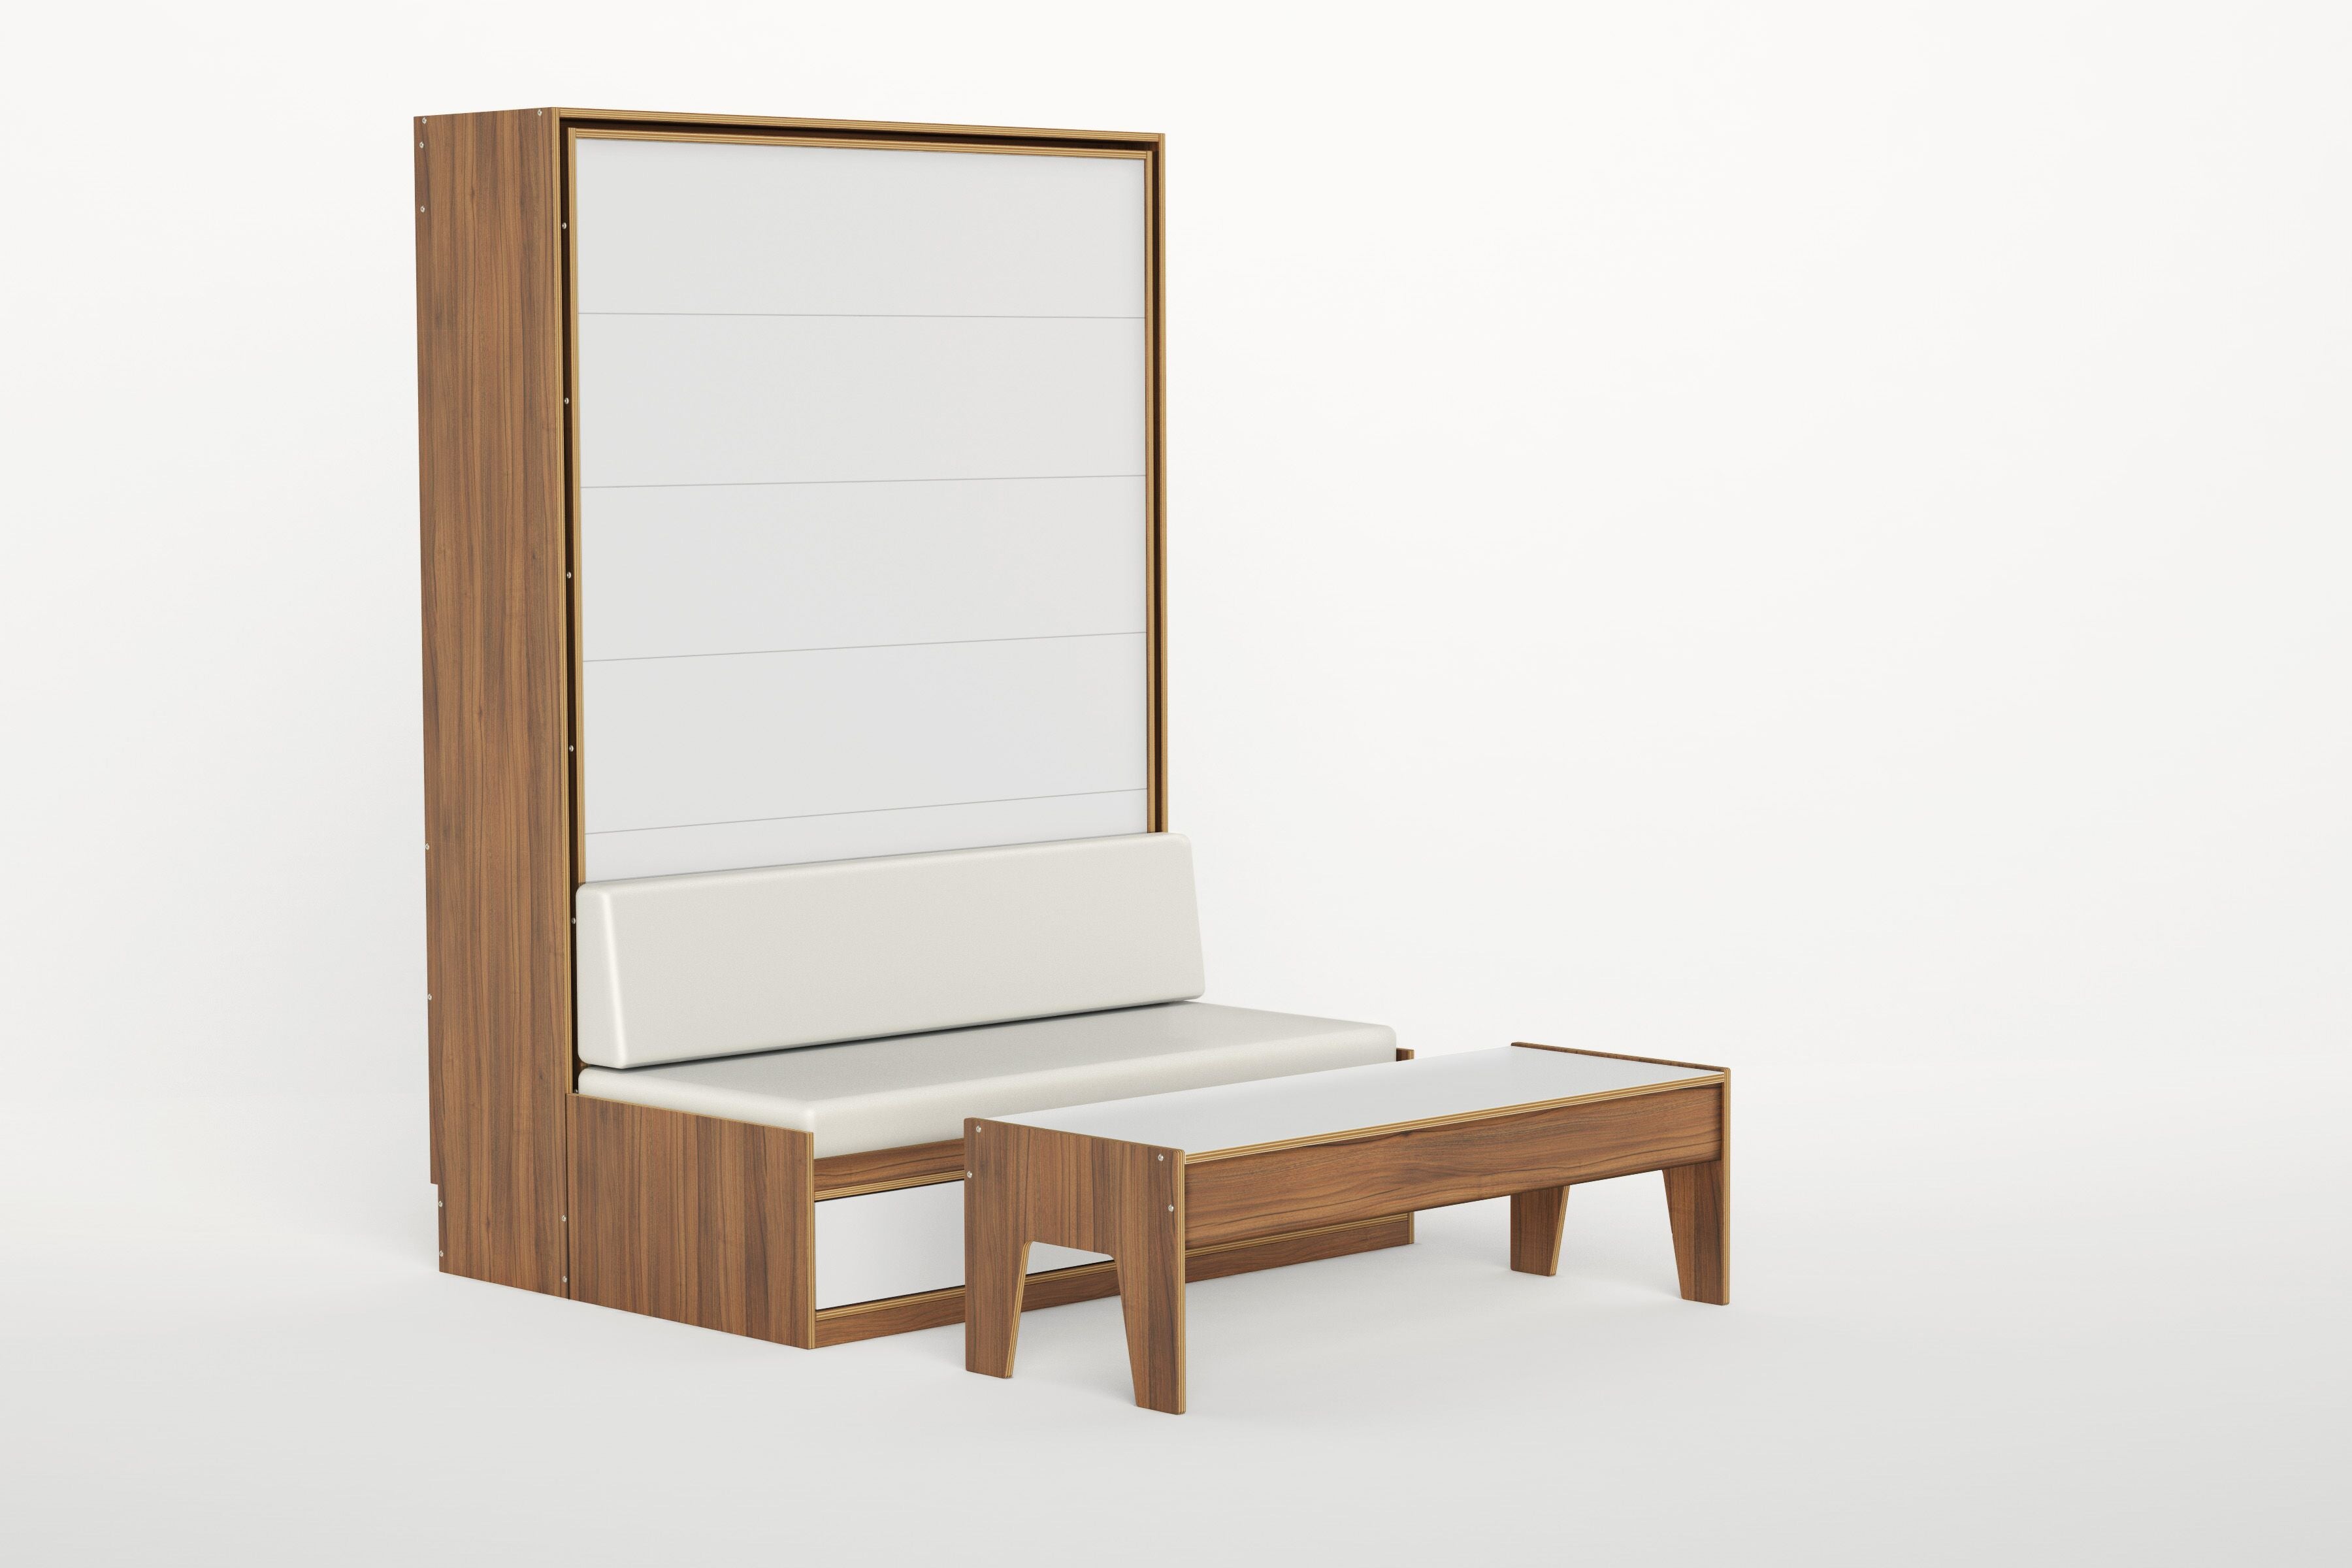 Wooden dressing table with mirror and bench against a white background.